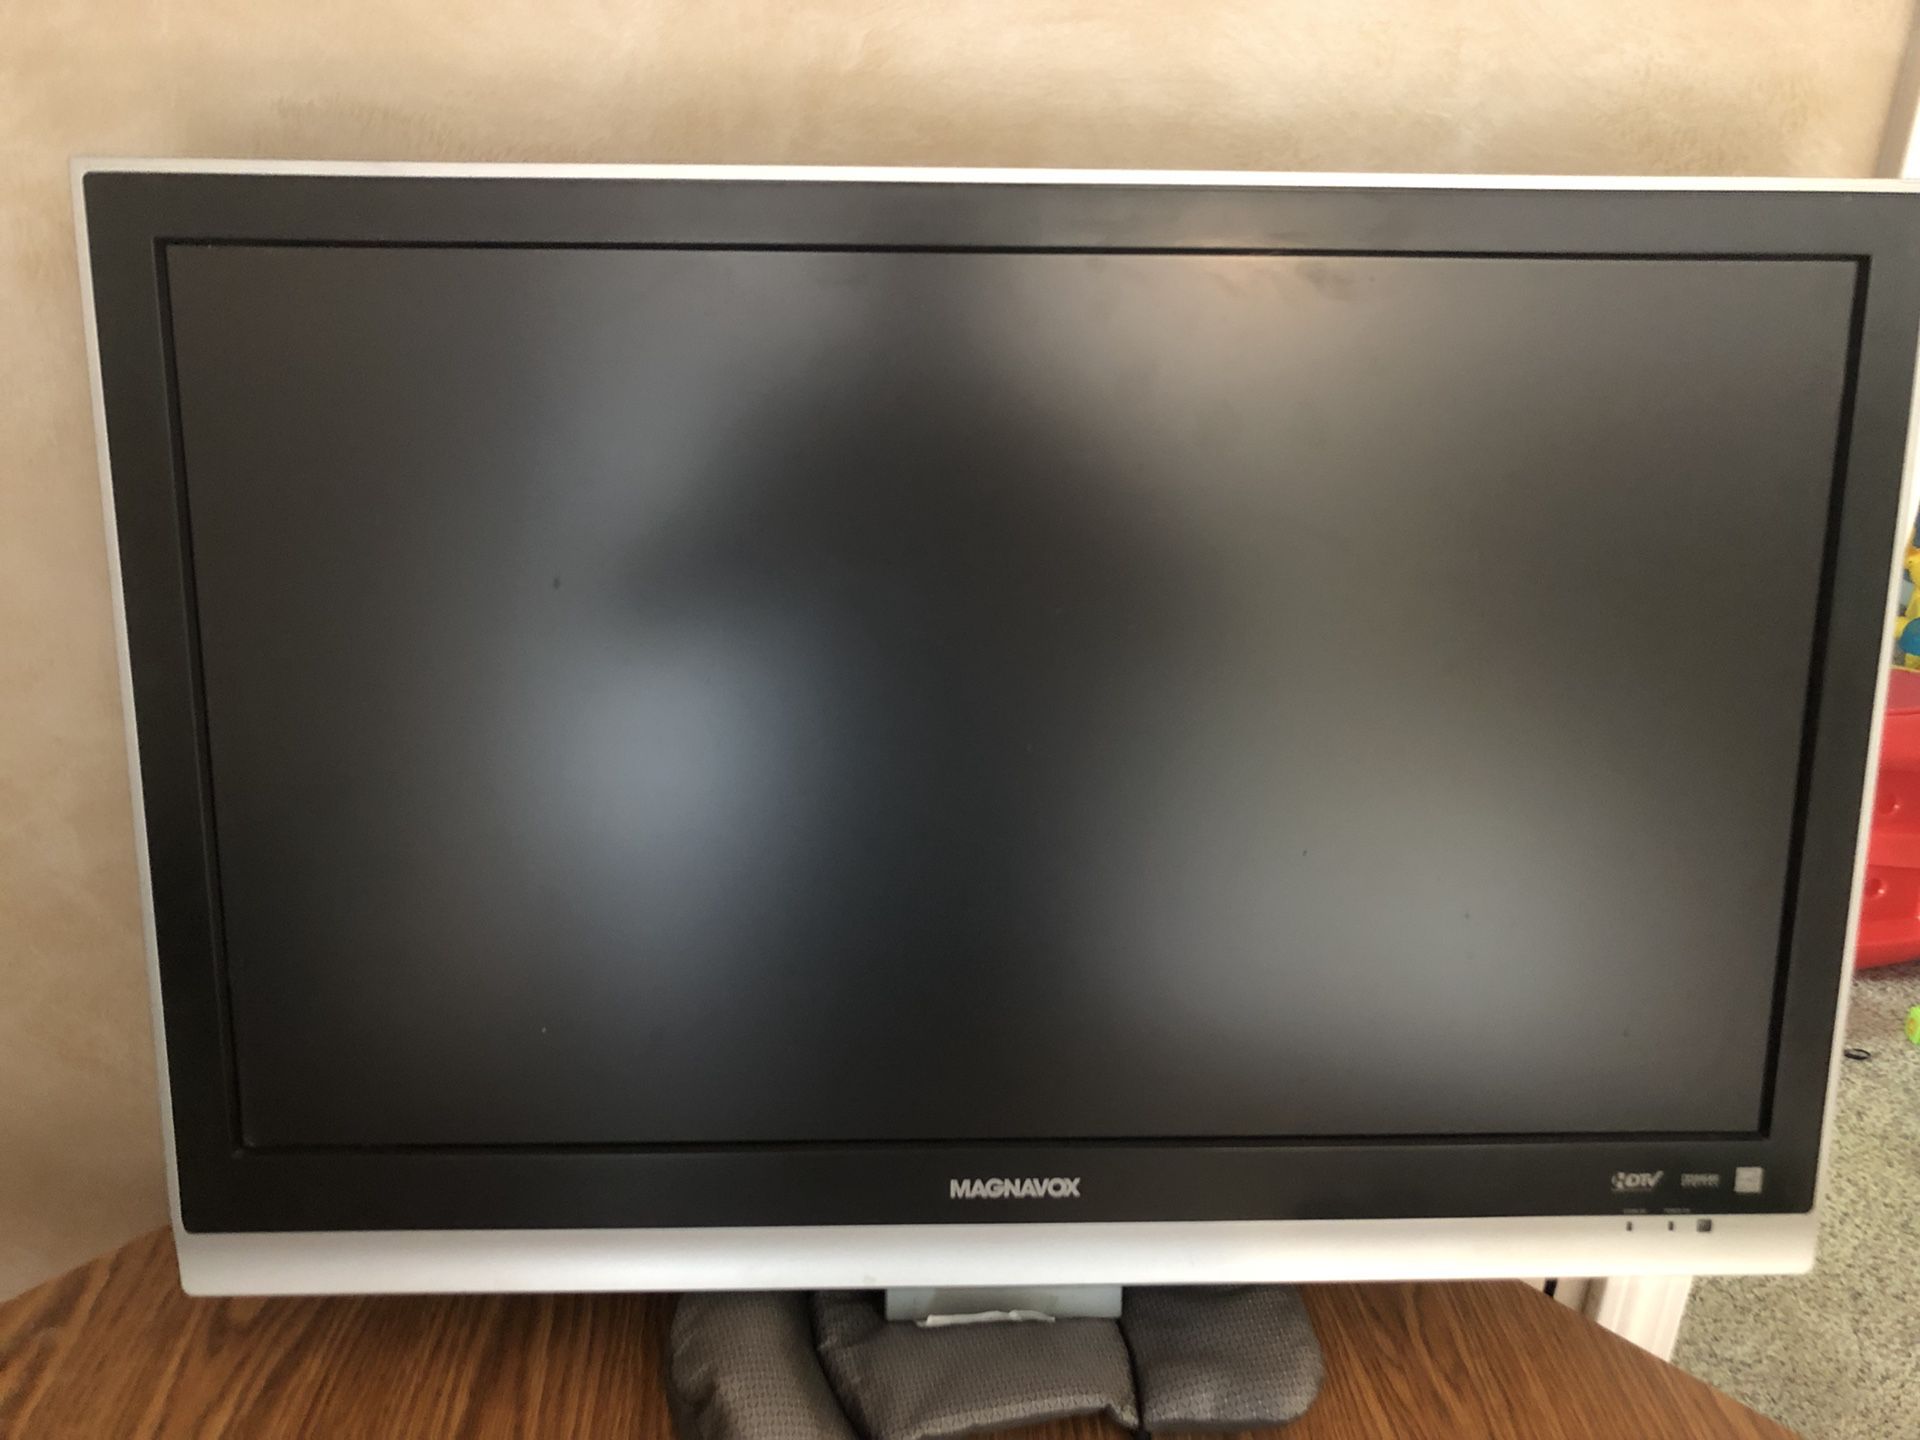 32” Magnavox flat screen LCD HD TV with remote